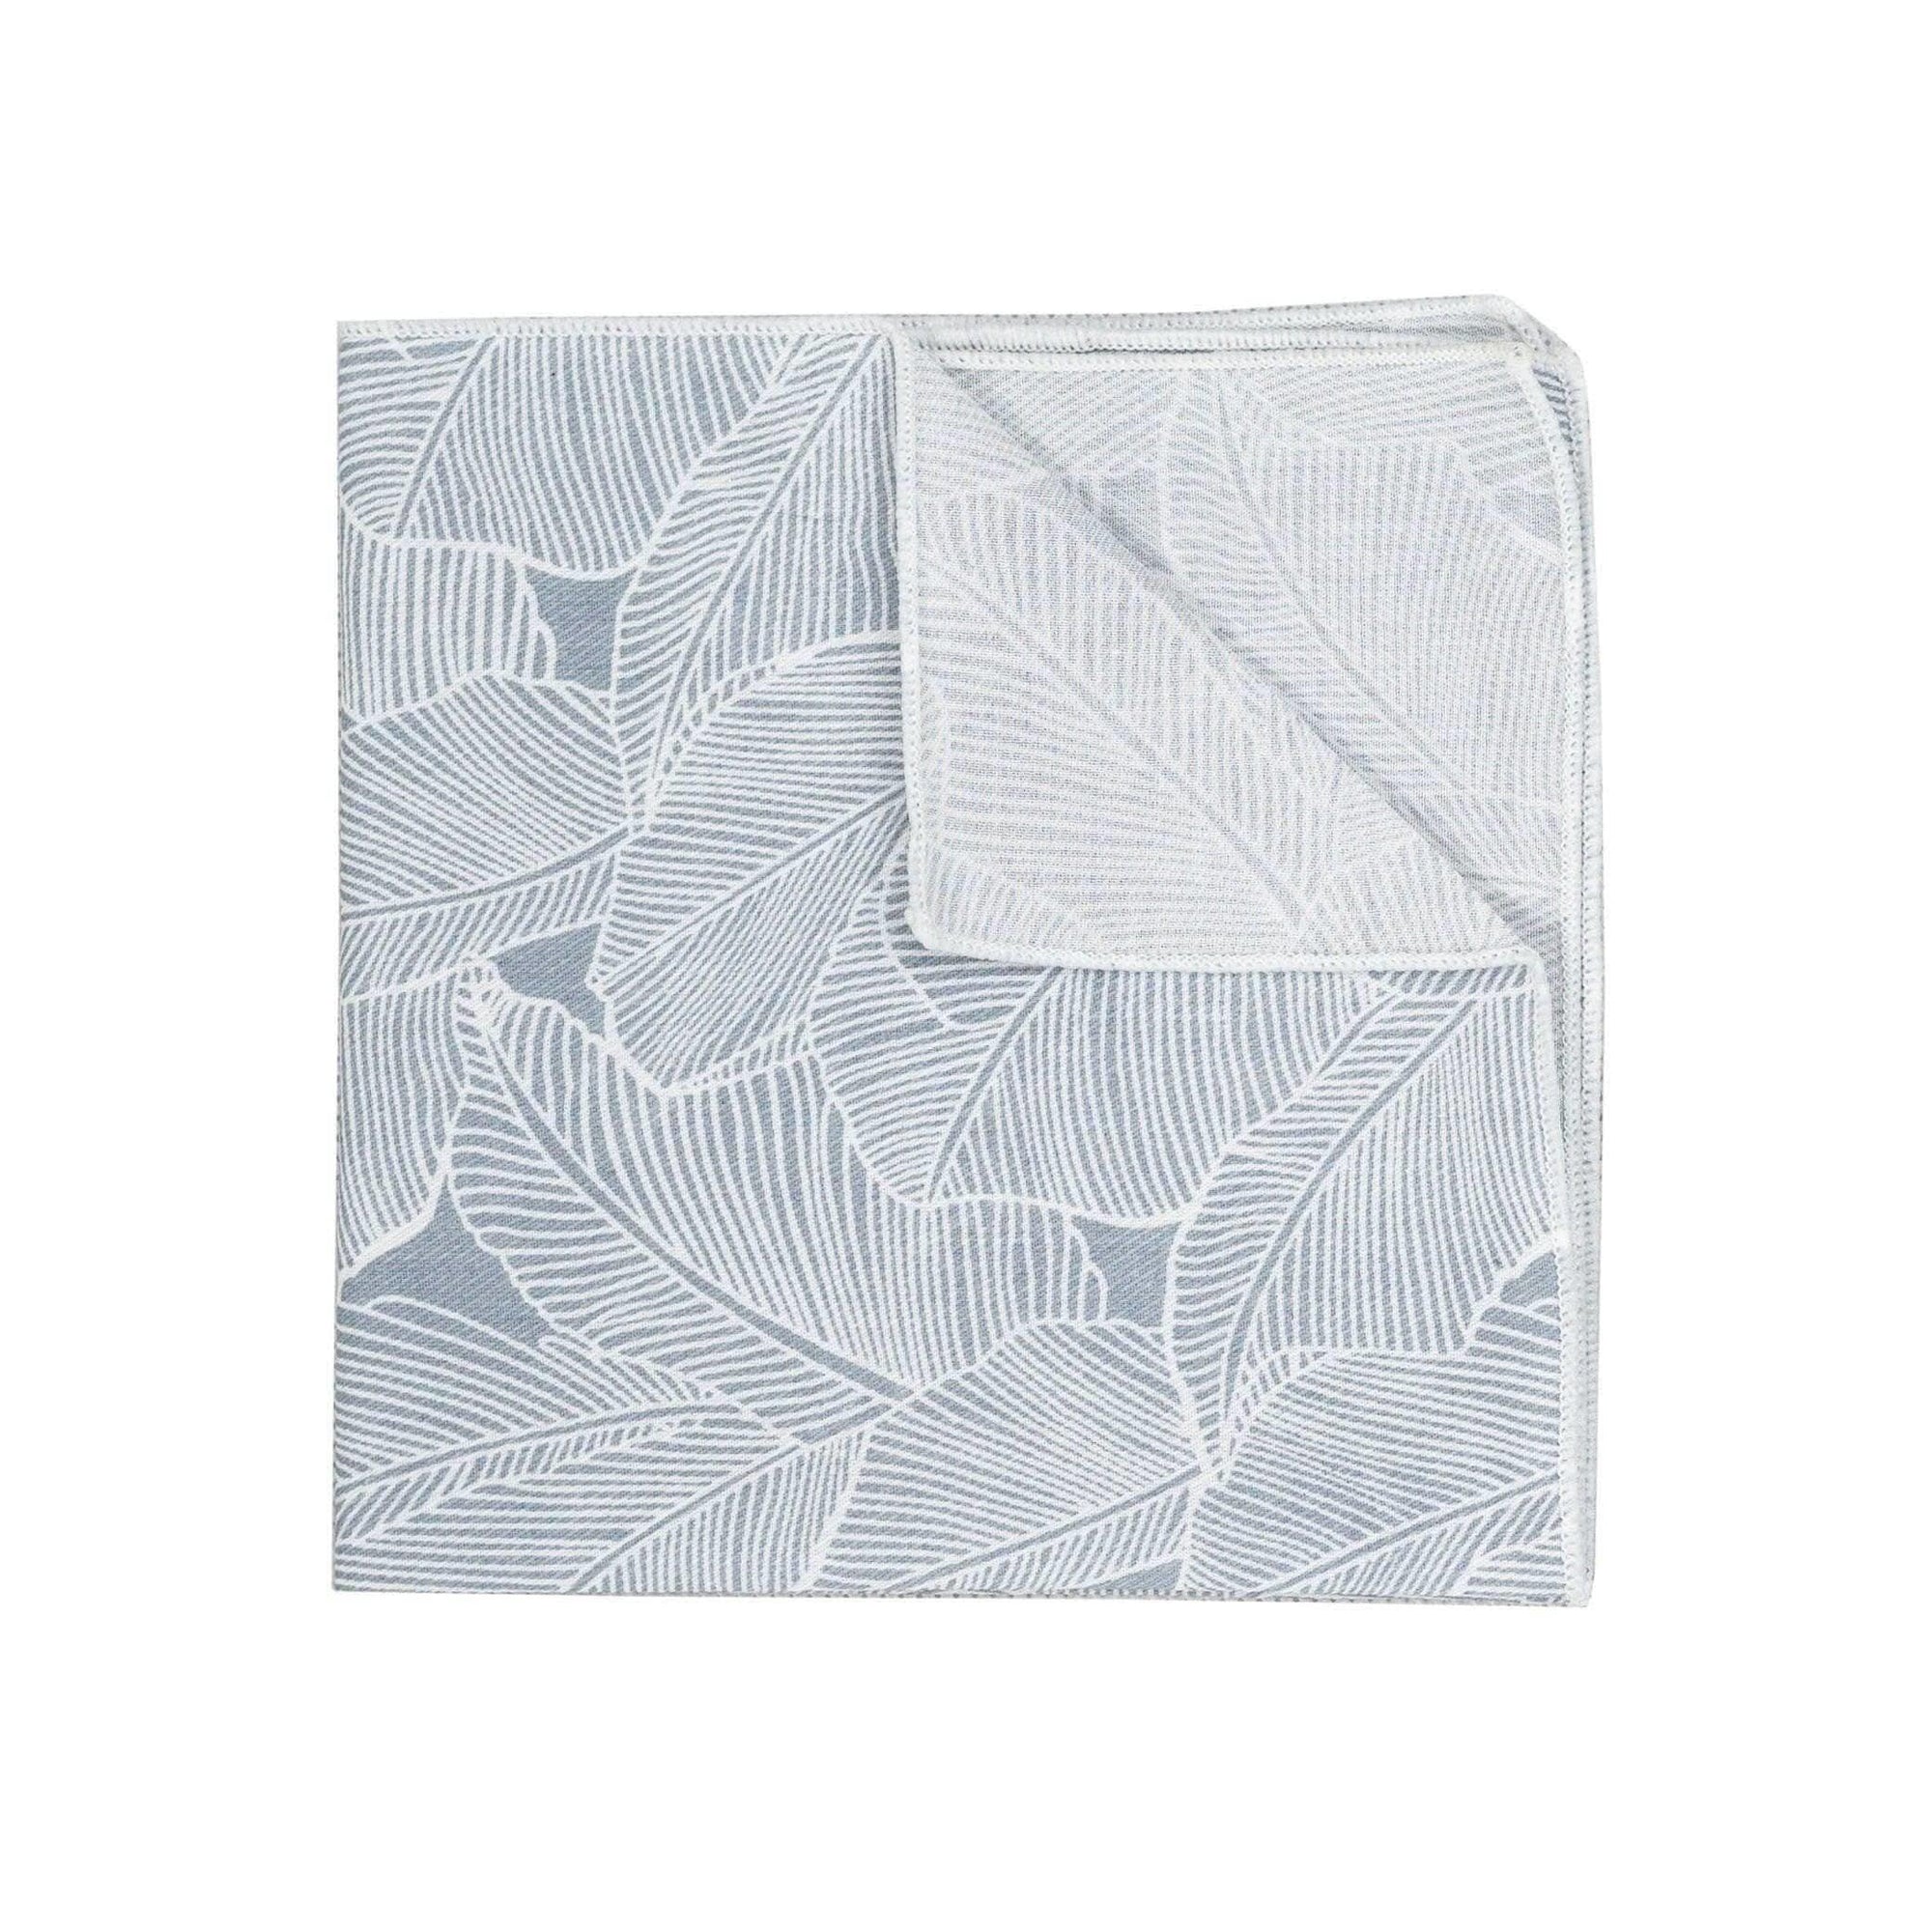 Gray Floral Pocket Square EZRA - MYTIESHOP Mytieshop Gray Floral Pocket Square Material CottonItem Length: 23 cm ( 9 inches)Item Width : 22 cm (8.6 inches) Color: Gray / Grey Great for: Groom Groomsmen Wedding Shoots Formal Prom Fancy Parties Gifts and presents A dashing addition to any outfit. Inspired by the changing leaves of fall, this pocket square is the perfect finishing touch to your look. With a versatile gray color and a modern floral print, it's perfect for any occasion. Whether you'r